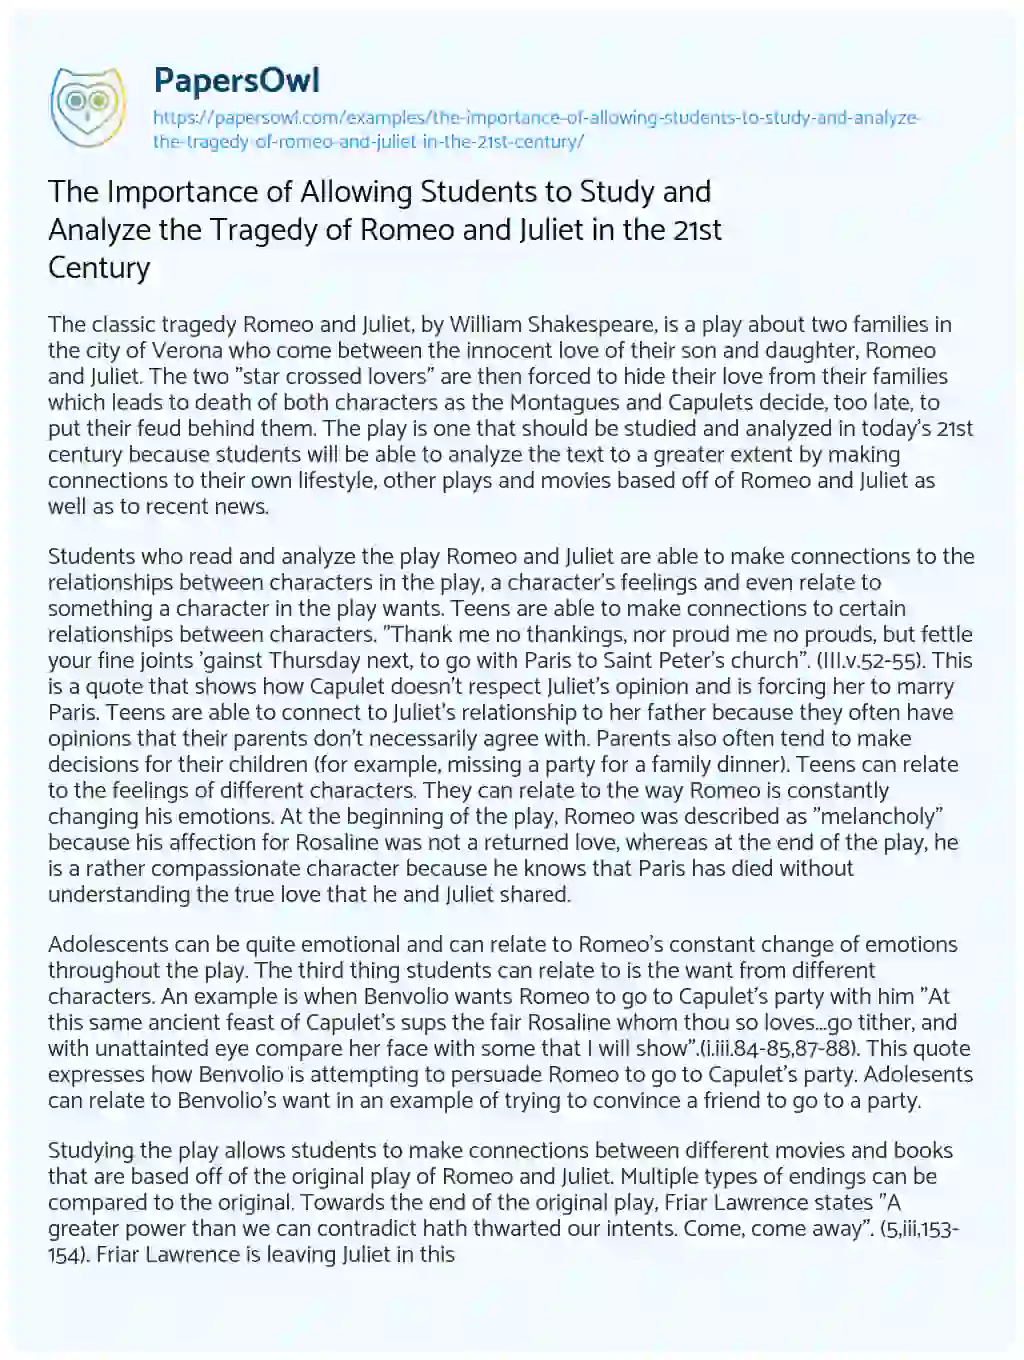 Essay on The Importance of Allowing Students to Study and Analyze the Tragedy of Romeo and Juliet in the 21st Century